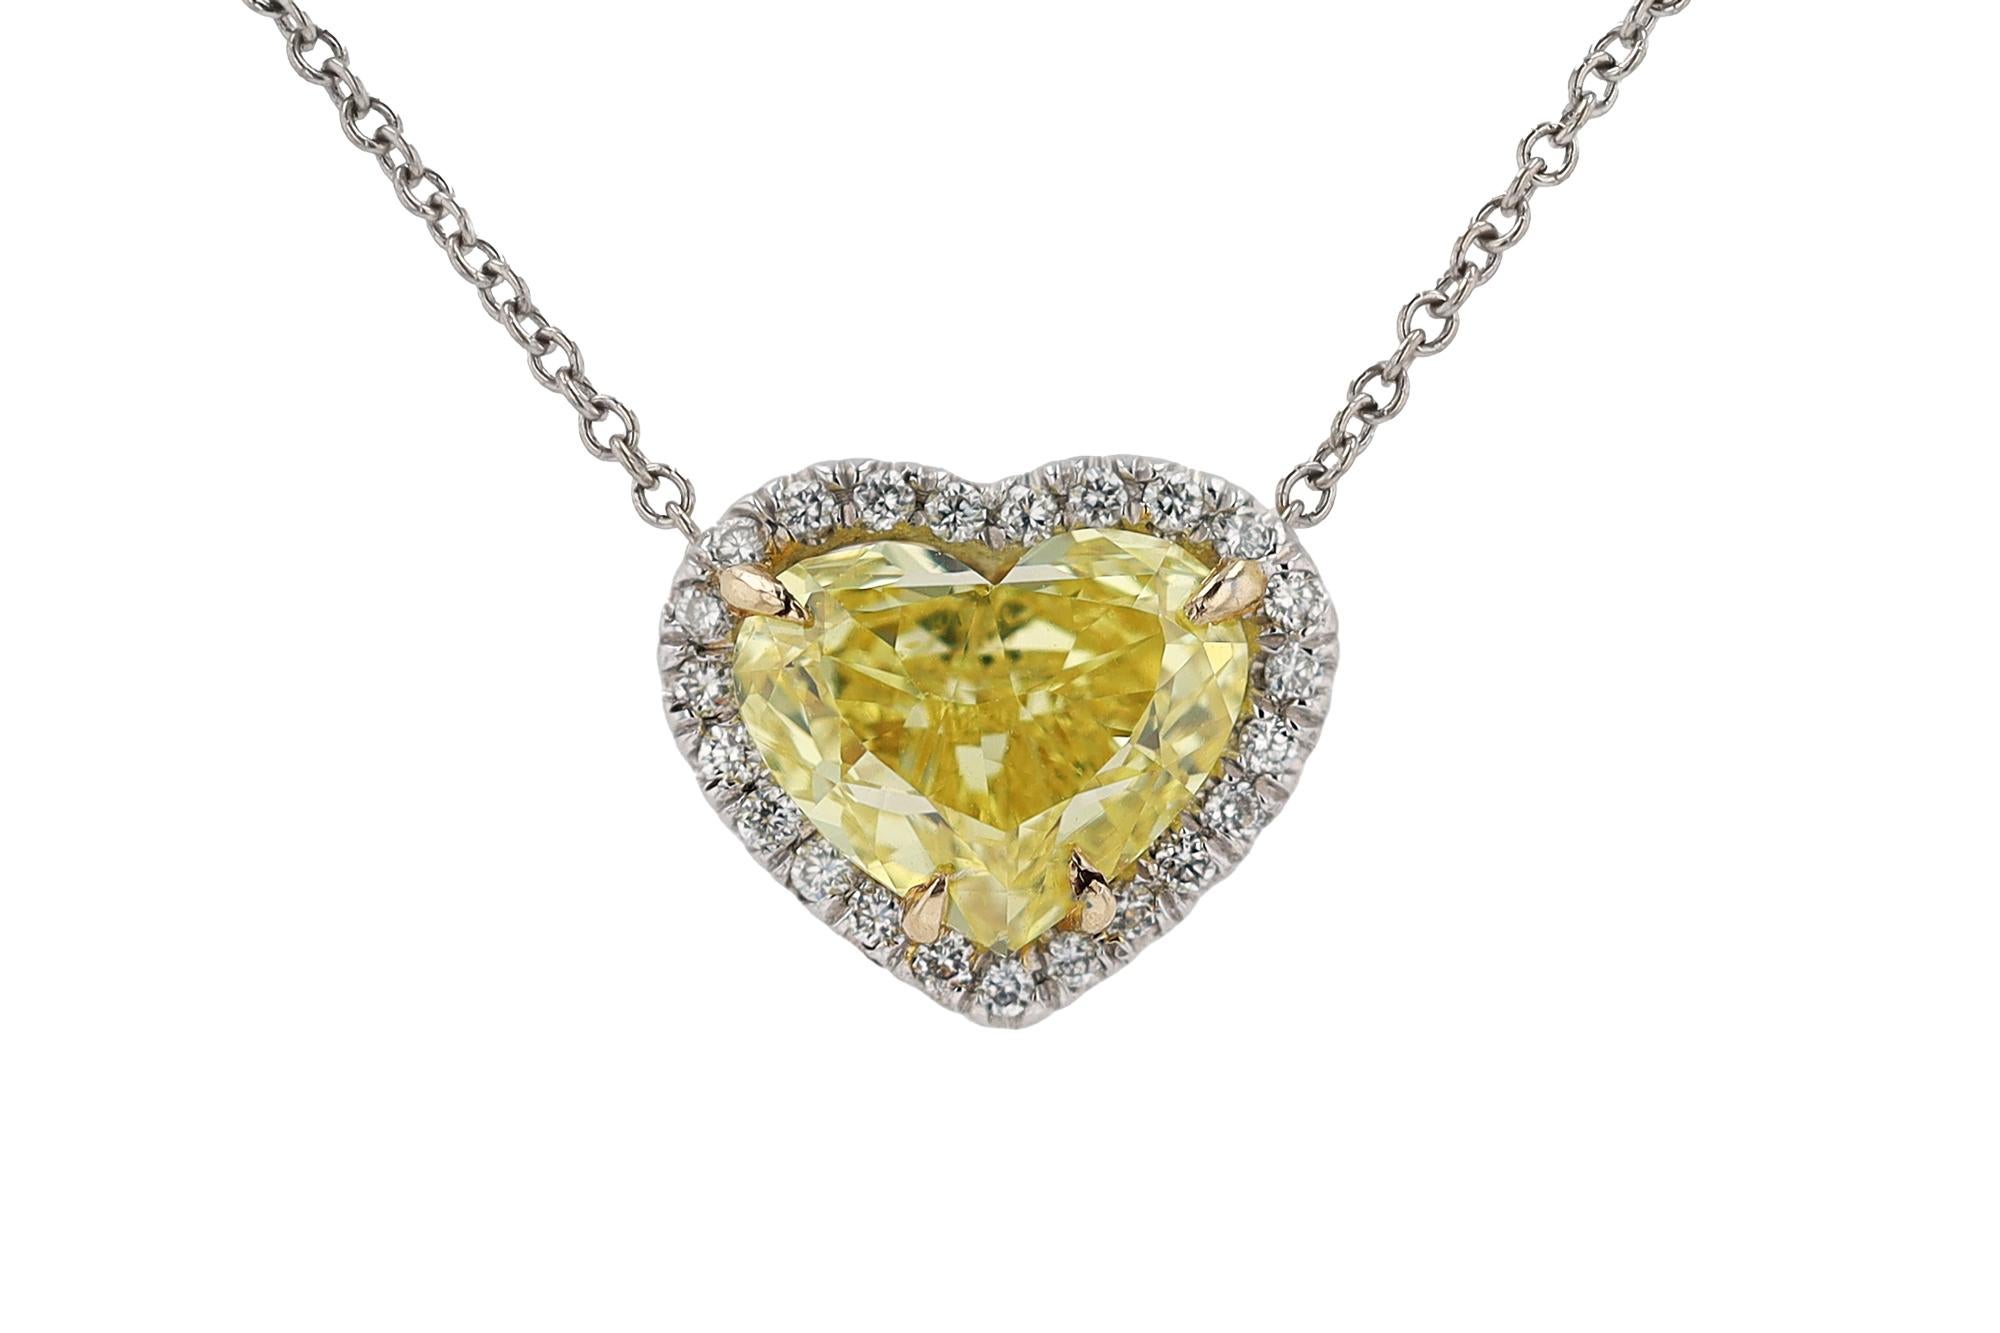 Bella Rosa Jewelers GIA Certified 2 Carat Vivid Yellow Diamond Heart Necklace For Sale